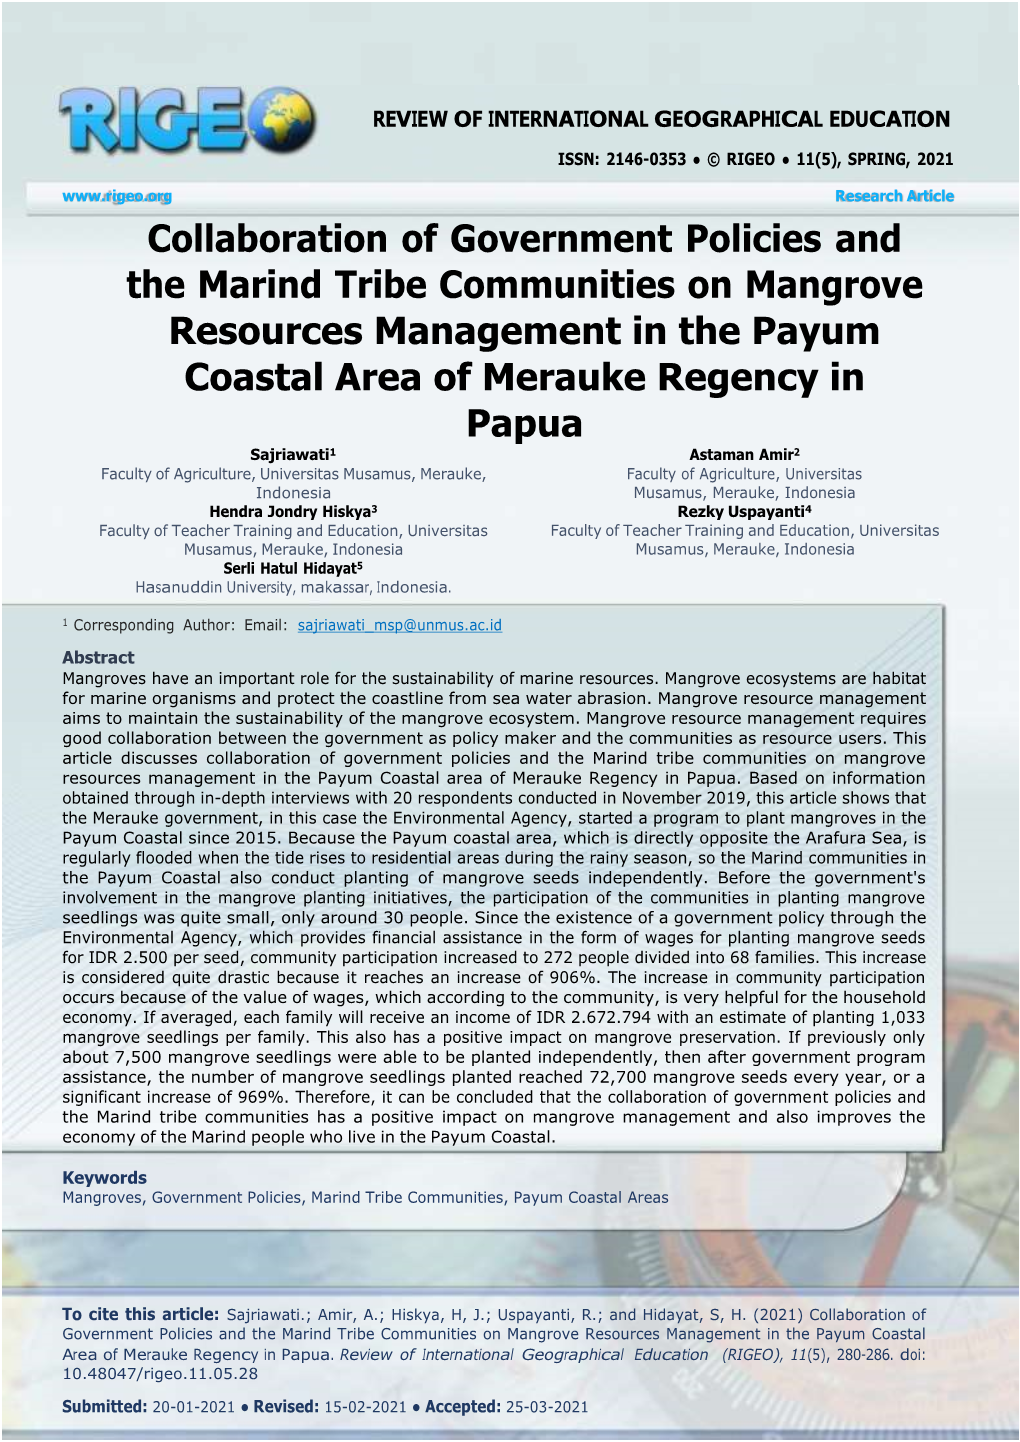 Collaboration of Government Policies and the Marind Tribe Communities on Mangrove Resources Management in the Payum Coastal Area